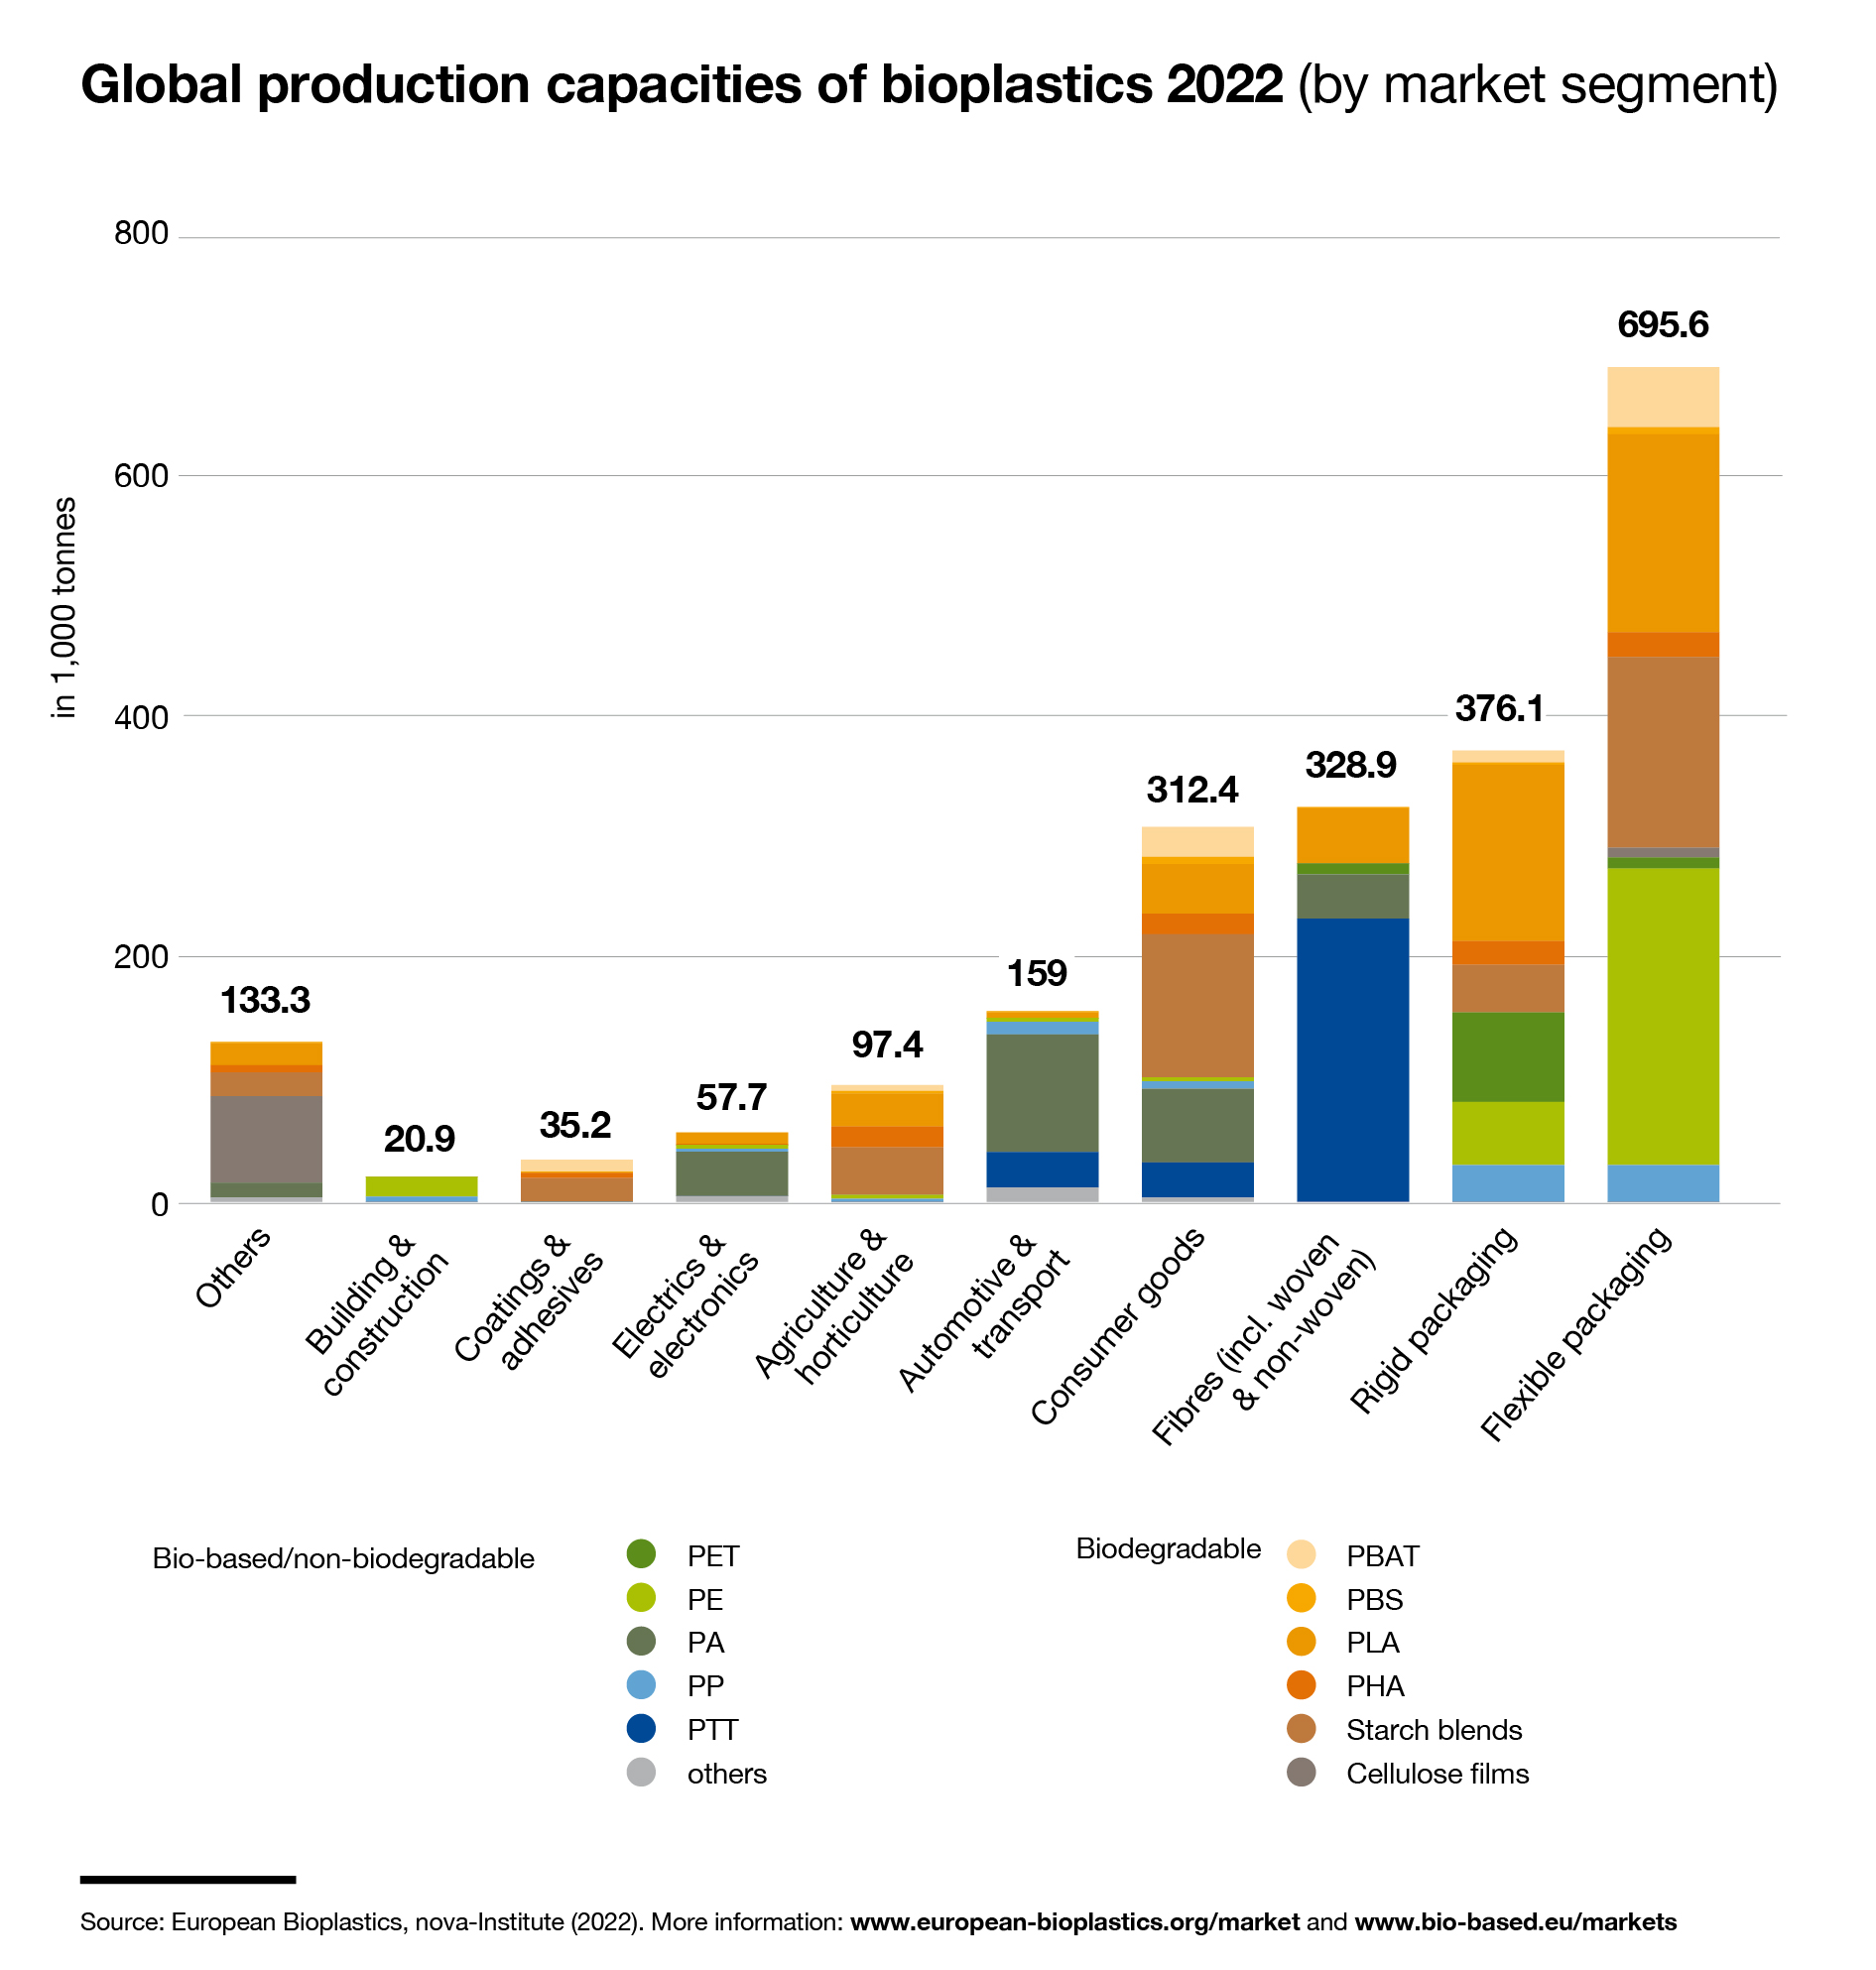 Global production capacities of bioplastics 2022 (by market segment and material type)